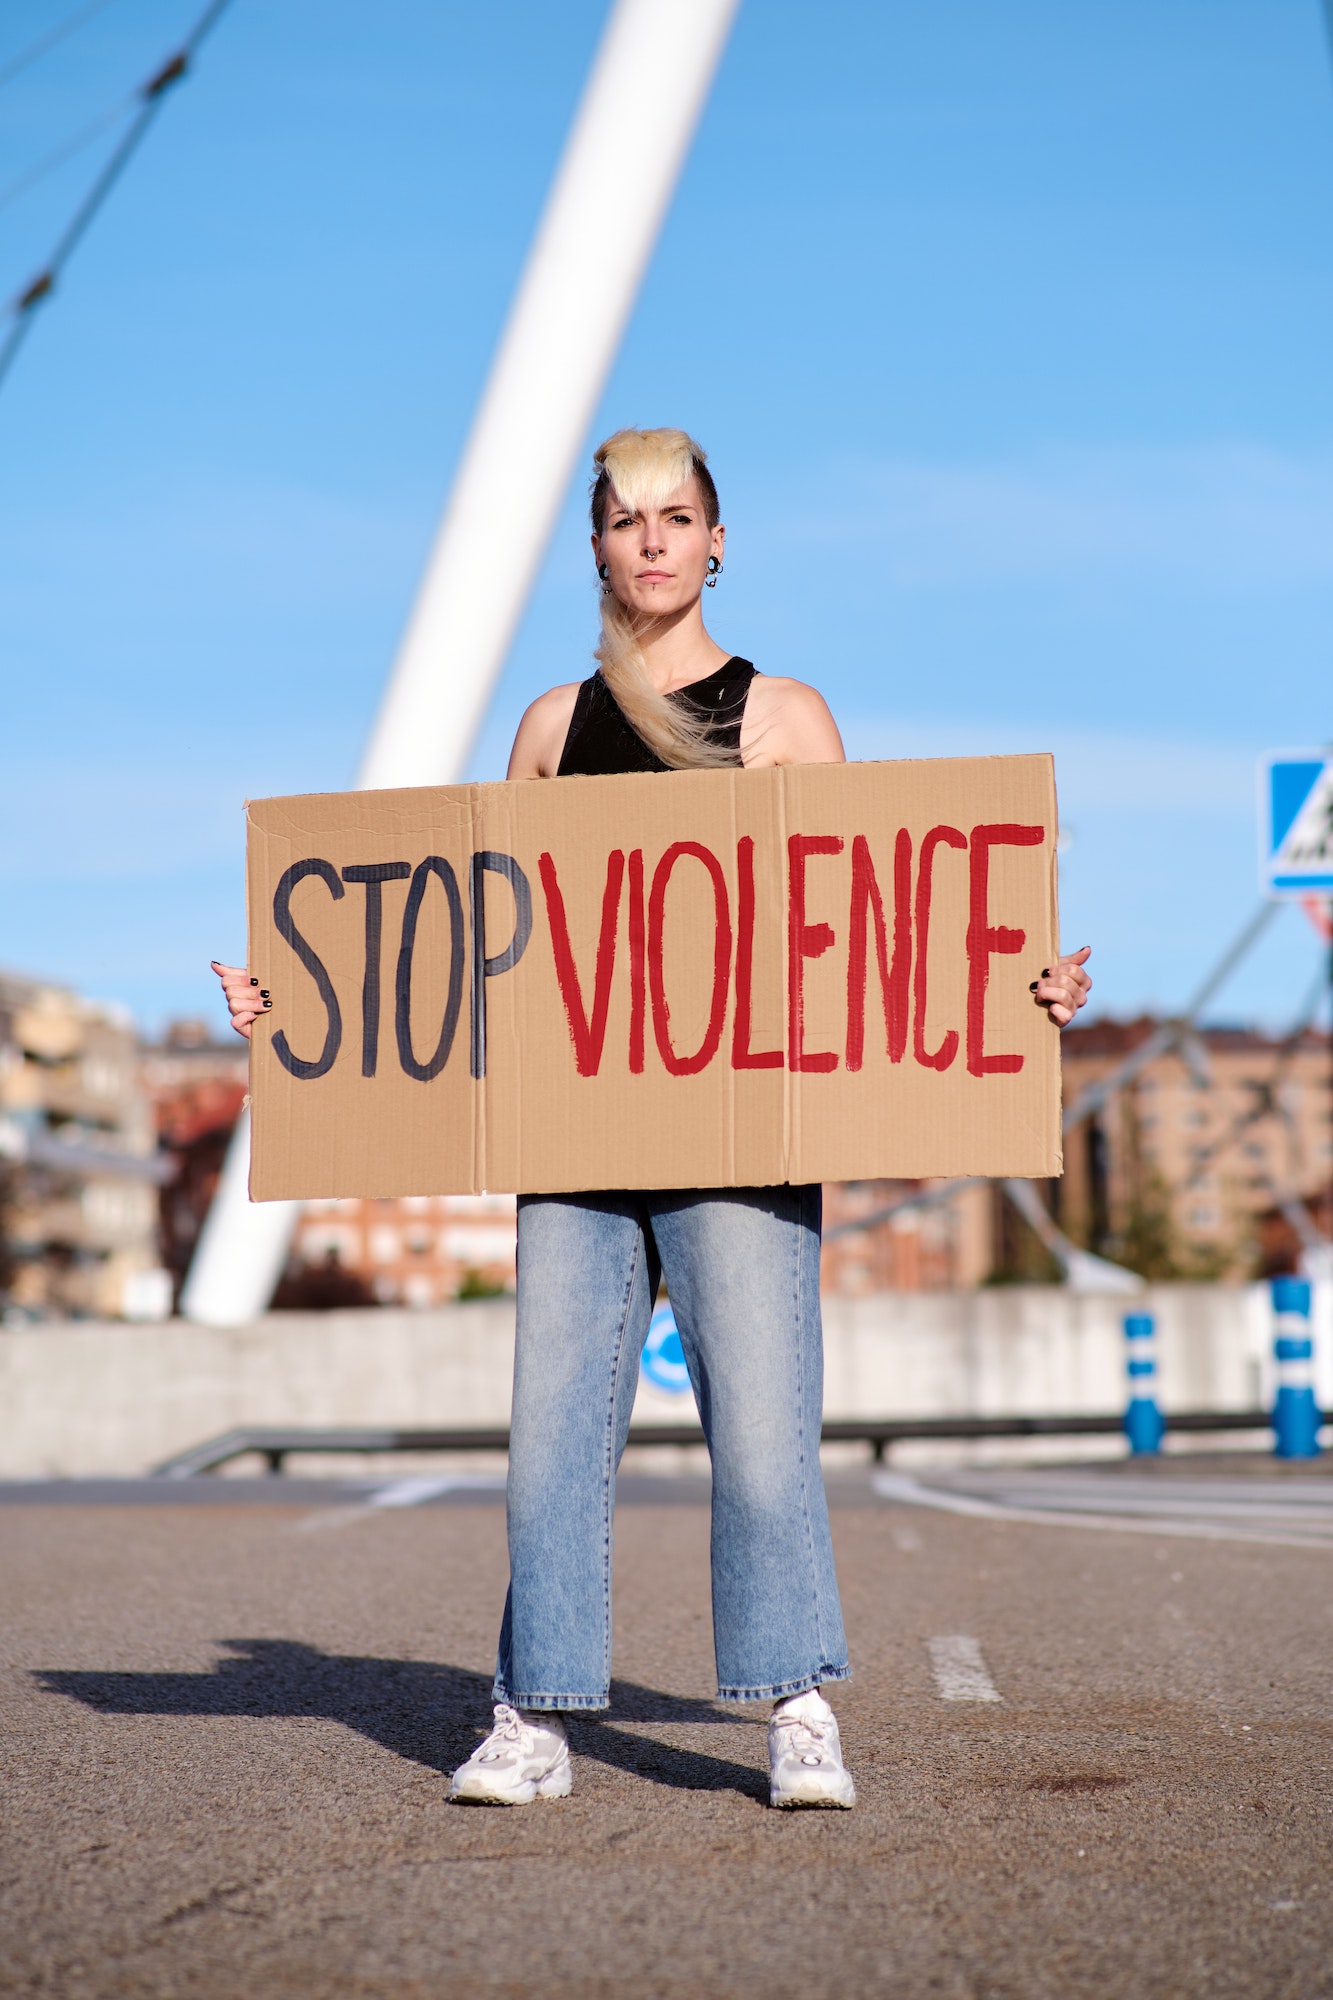 A young protester holding a placard and protesting against gender violence.